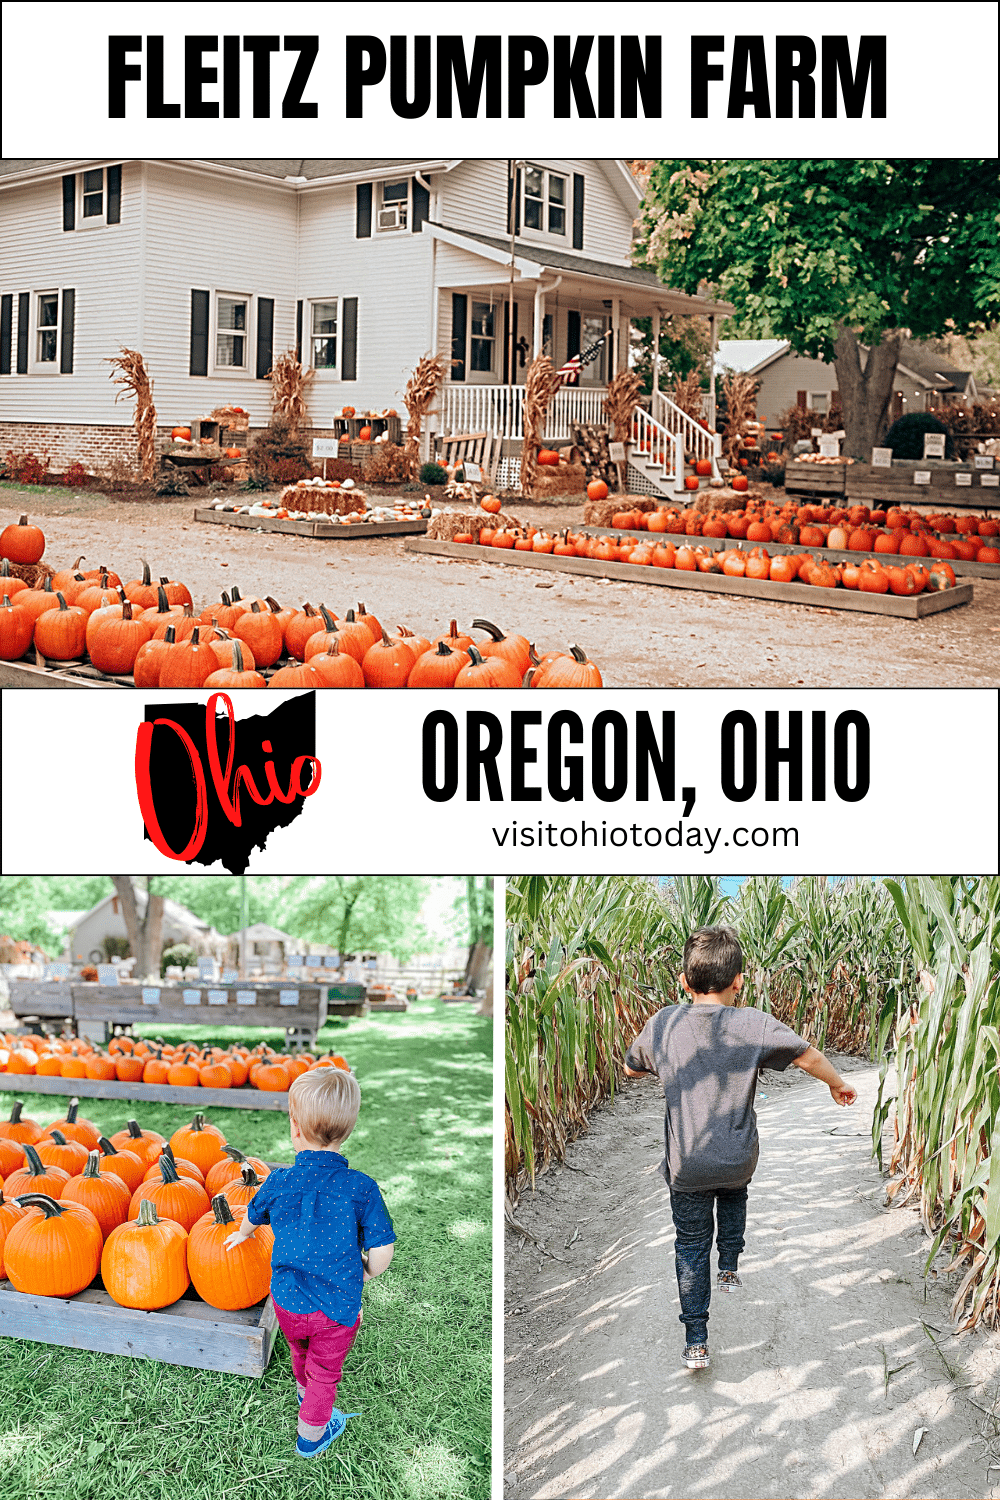 Fleitz Pumpkin Farm is the perfect place to spend your fall. It is an affordable, fun day out for all the family! Read on to find out more...